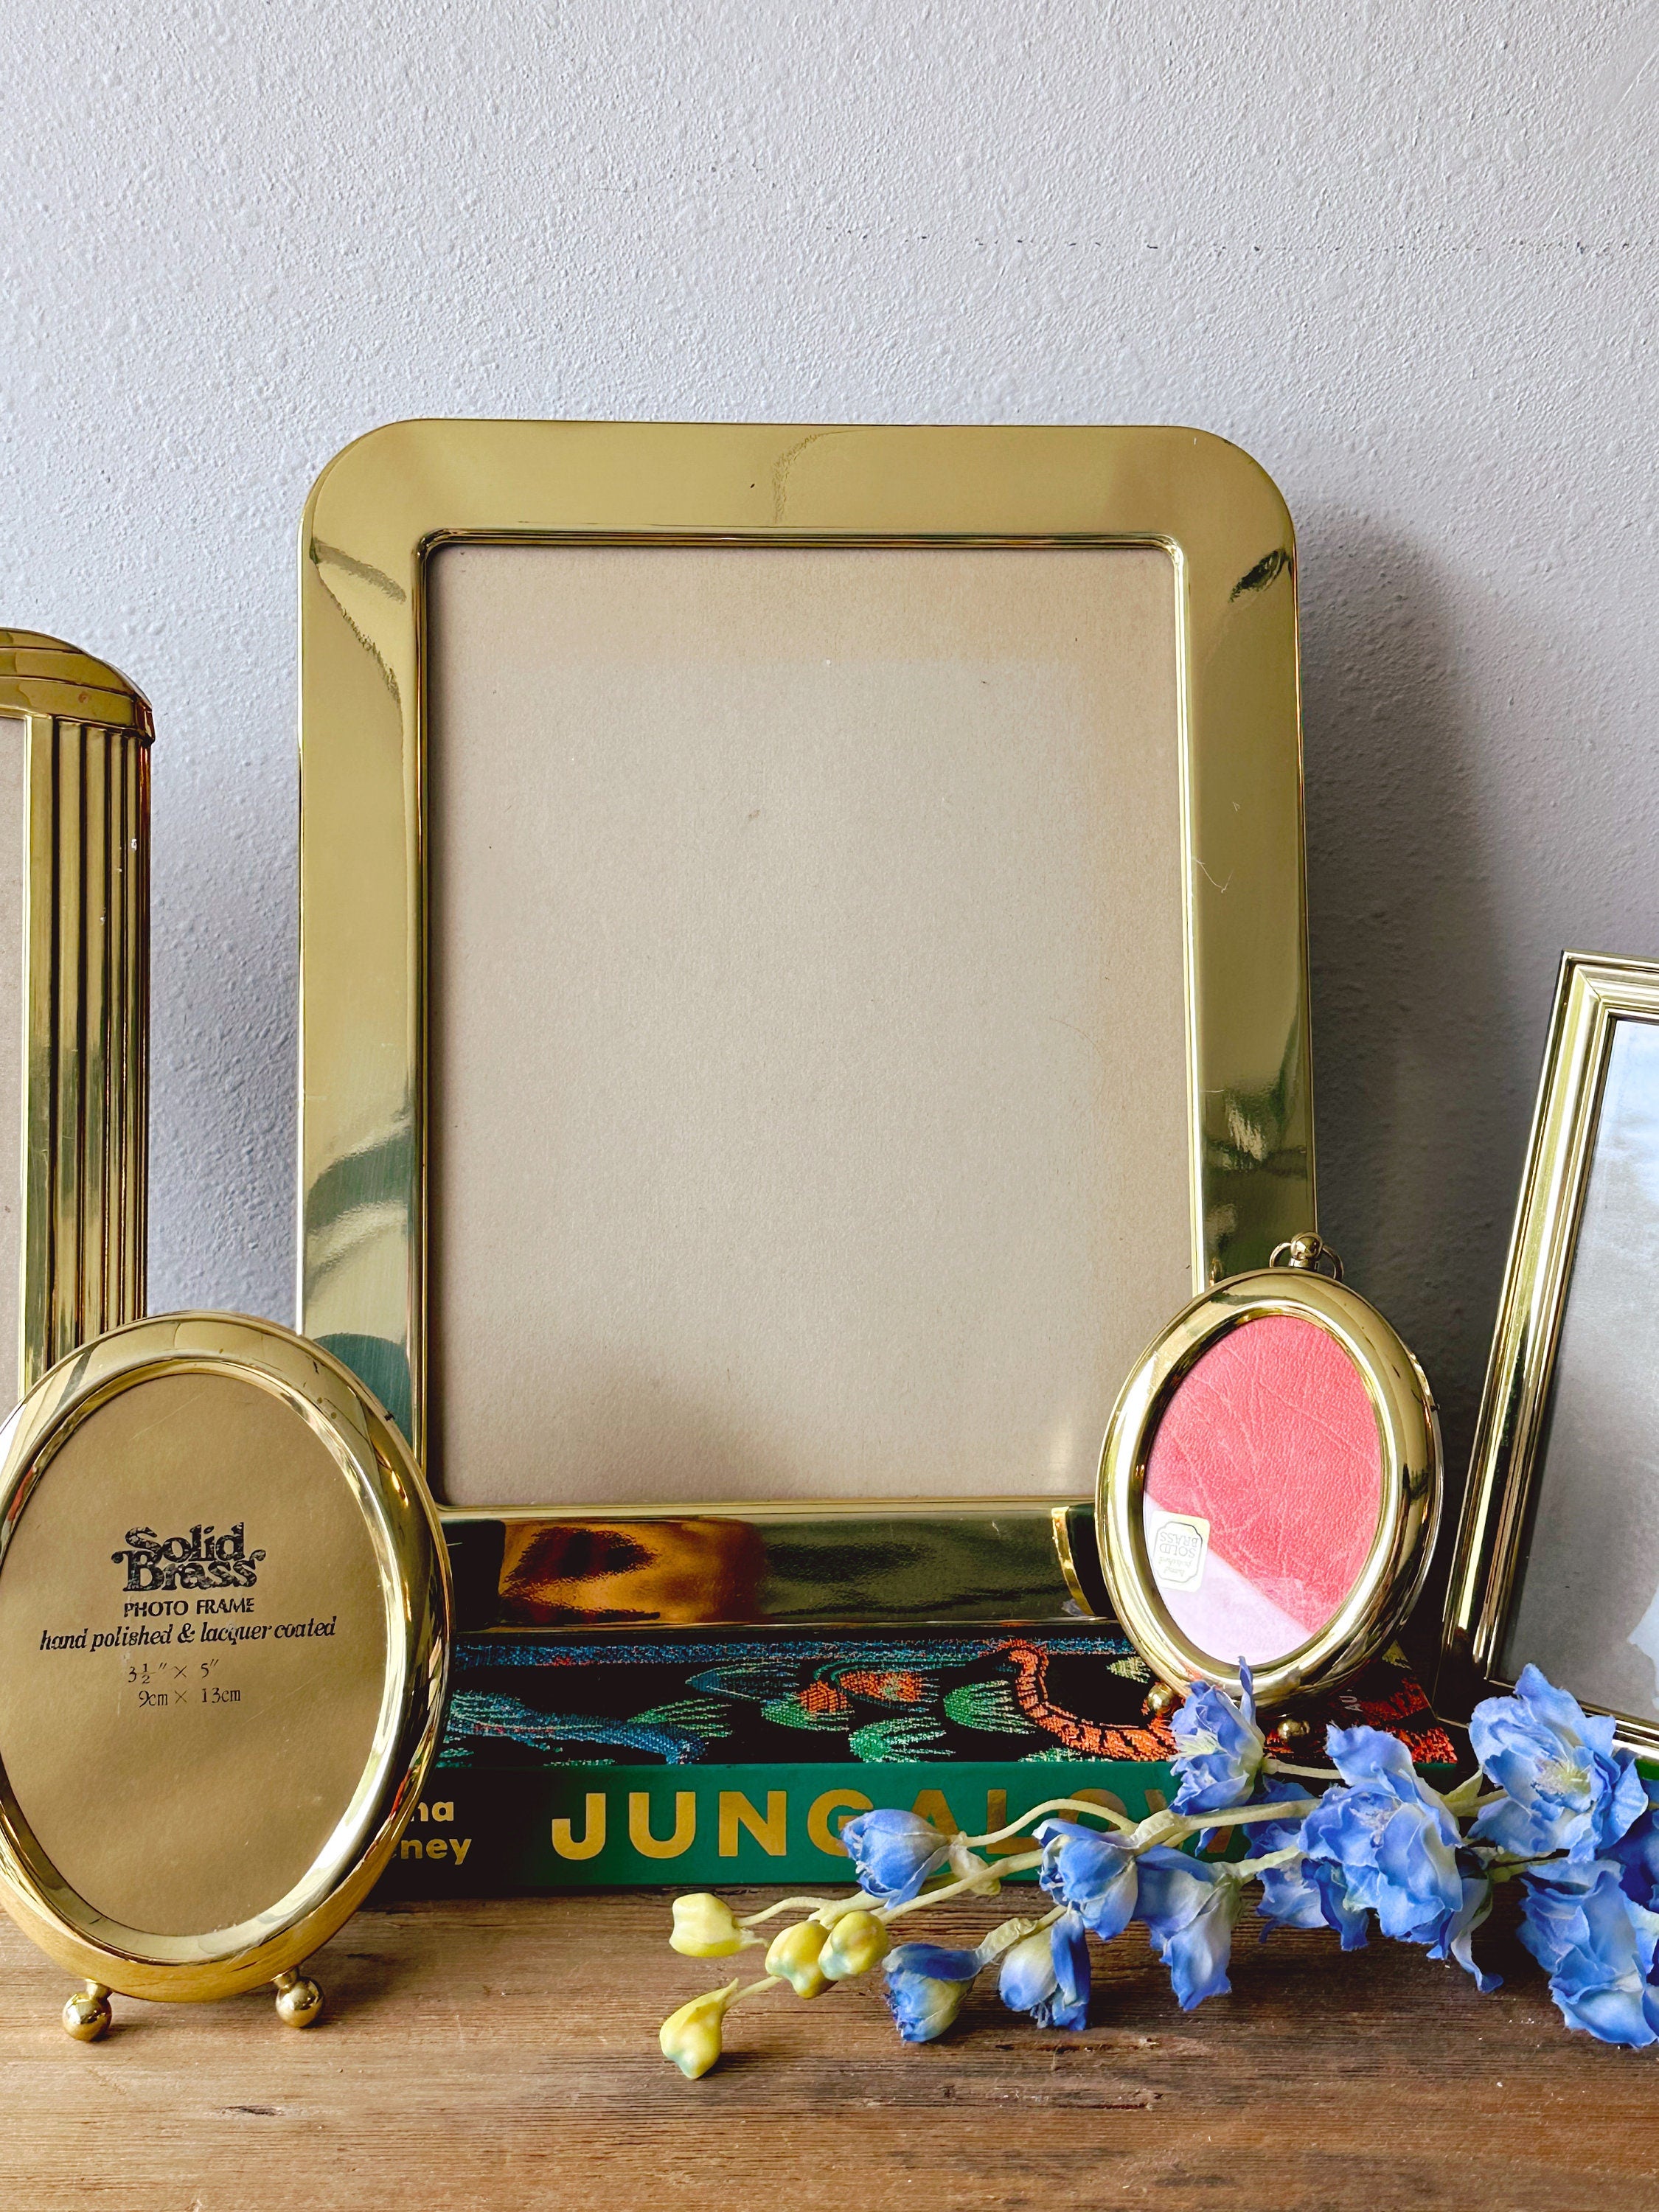 Assorted Vintage Solid Brass Rectangular and Oval Picture Frame | SOLD SEPERATELY | 8x10 and 5x7 Inch Gold Lacquered Photo Frame